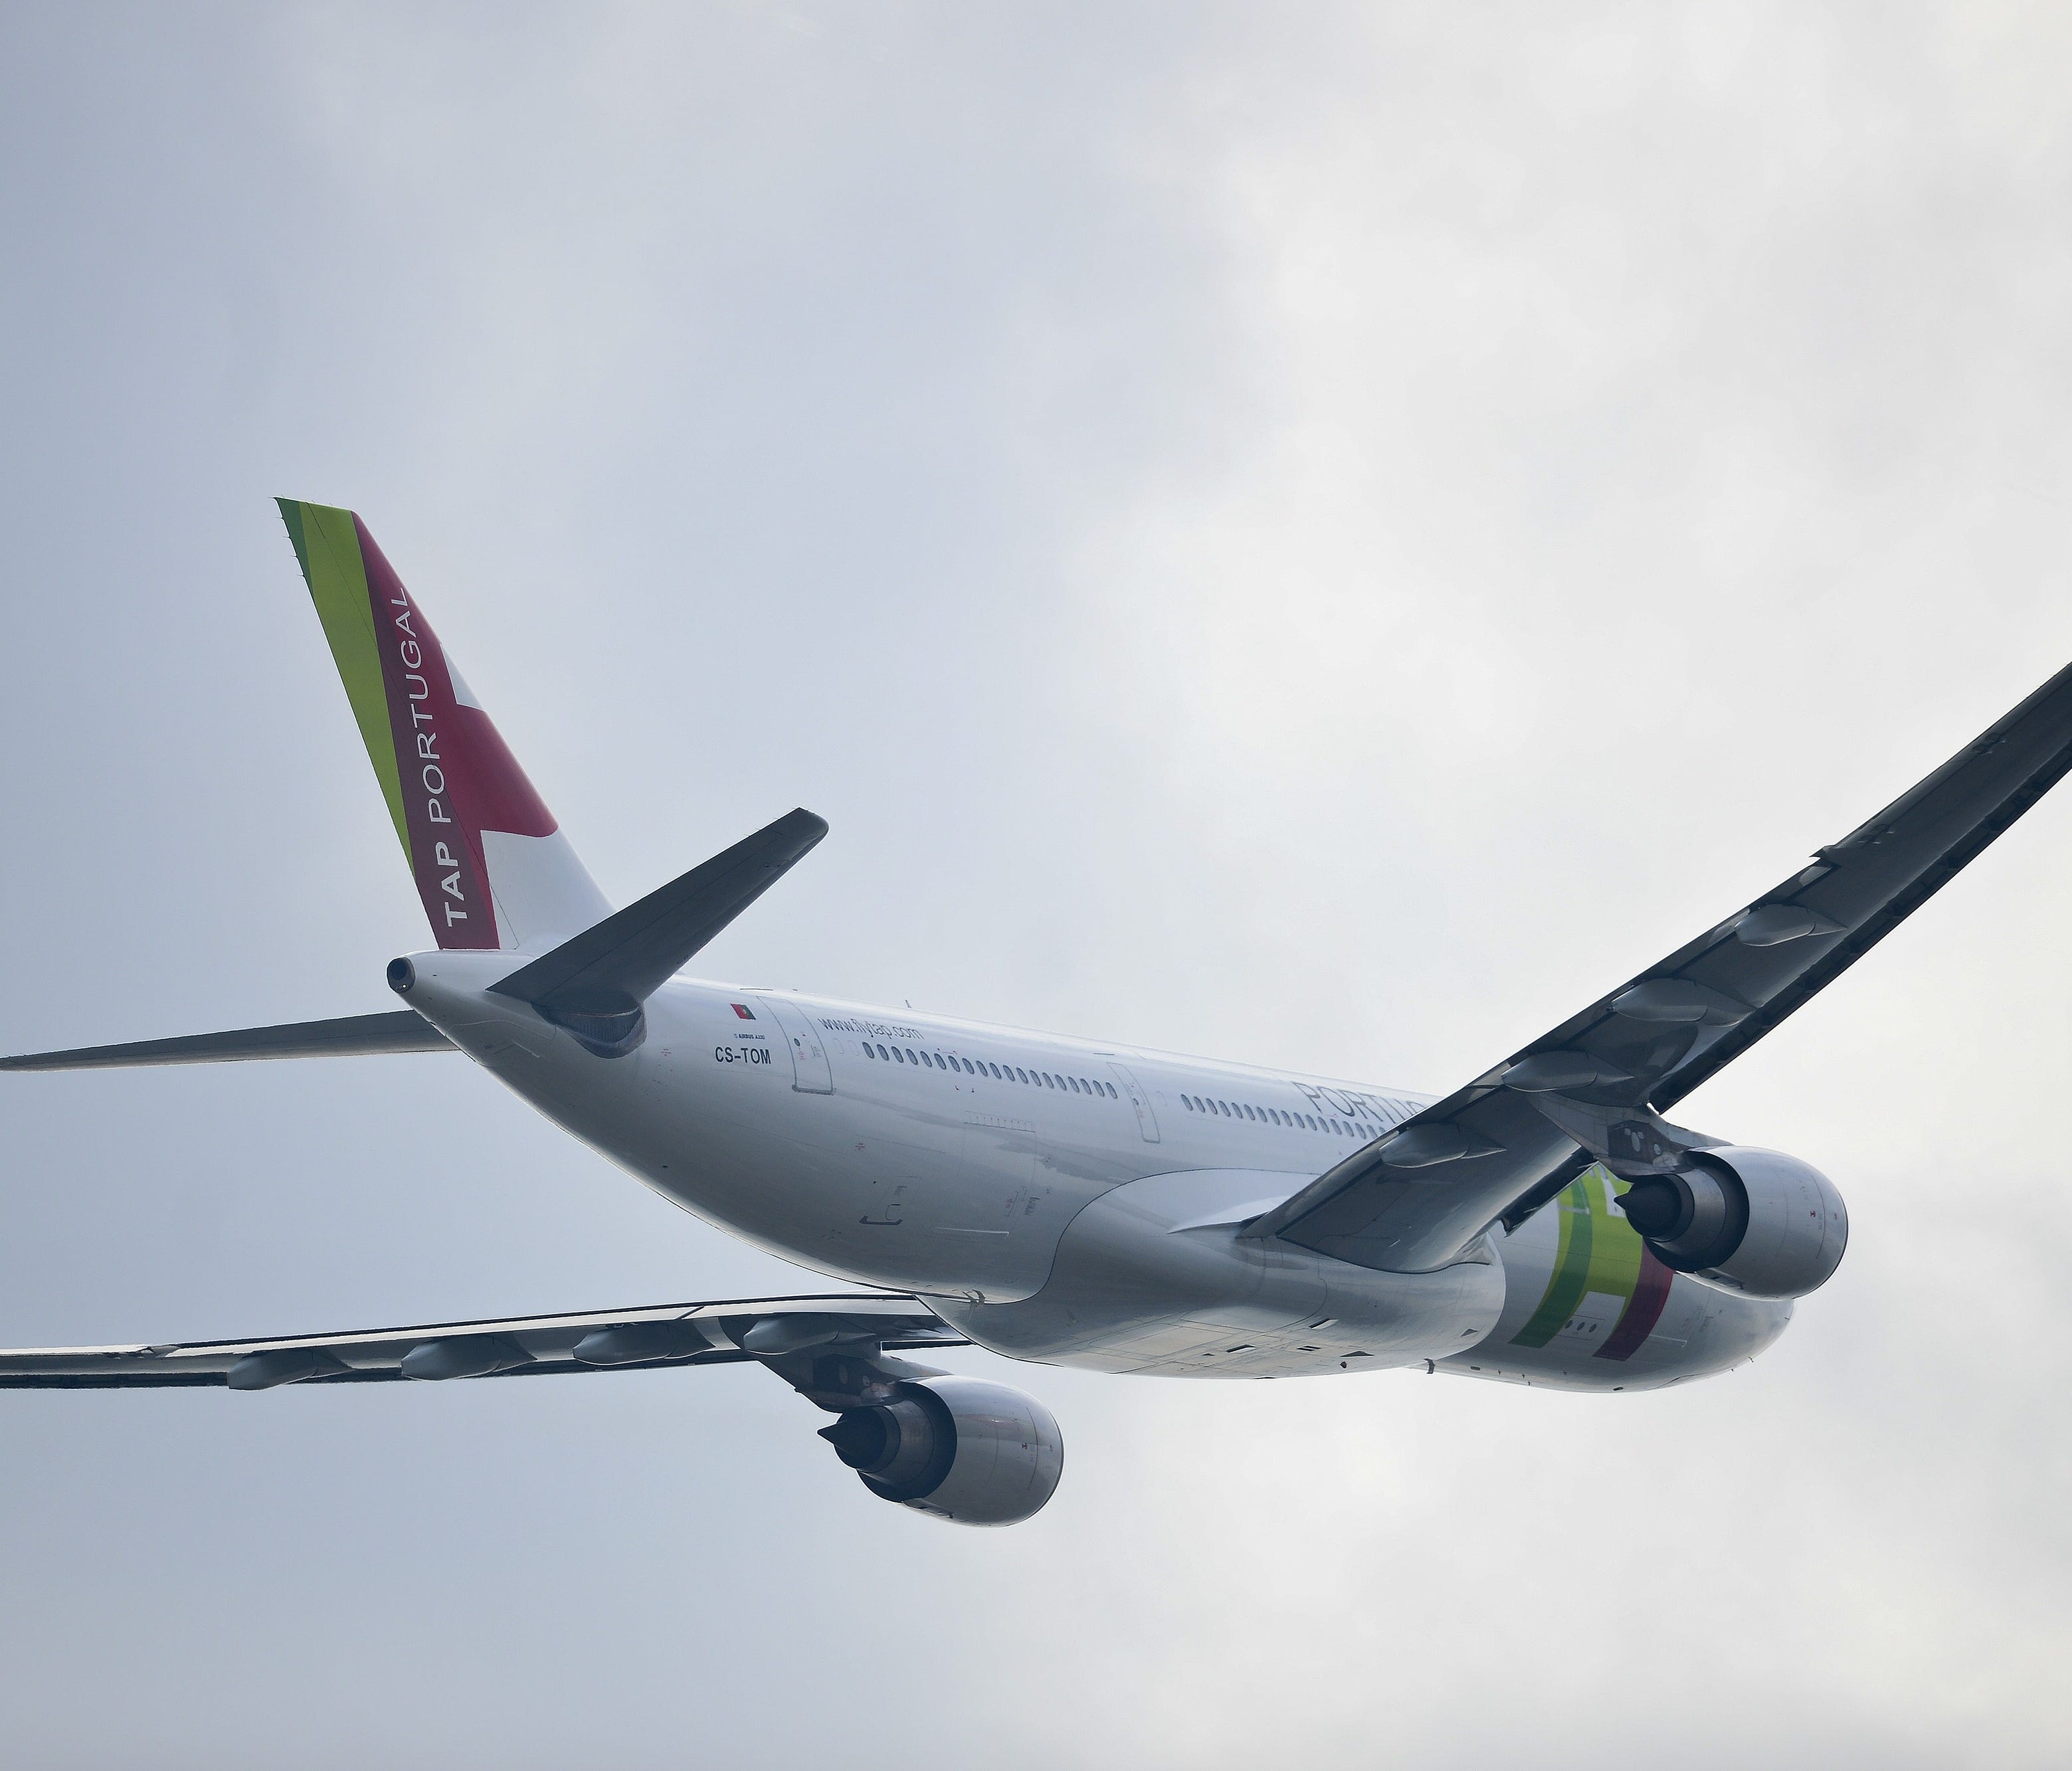 A TAP Air Portugal Airbus A330 takes off from the Lisbon Airport on Feb. 6, 2016.